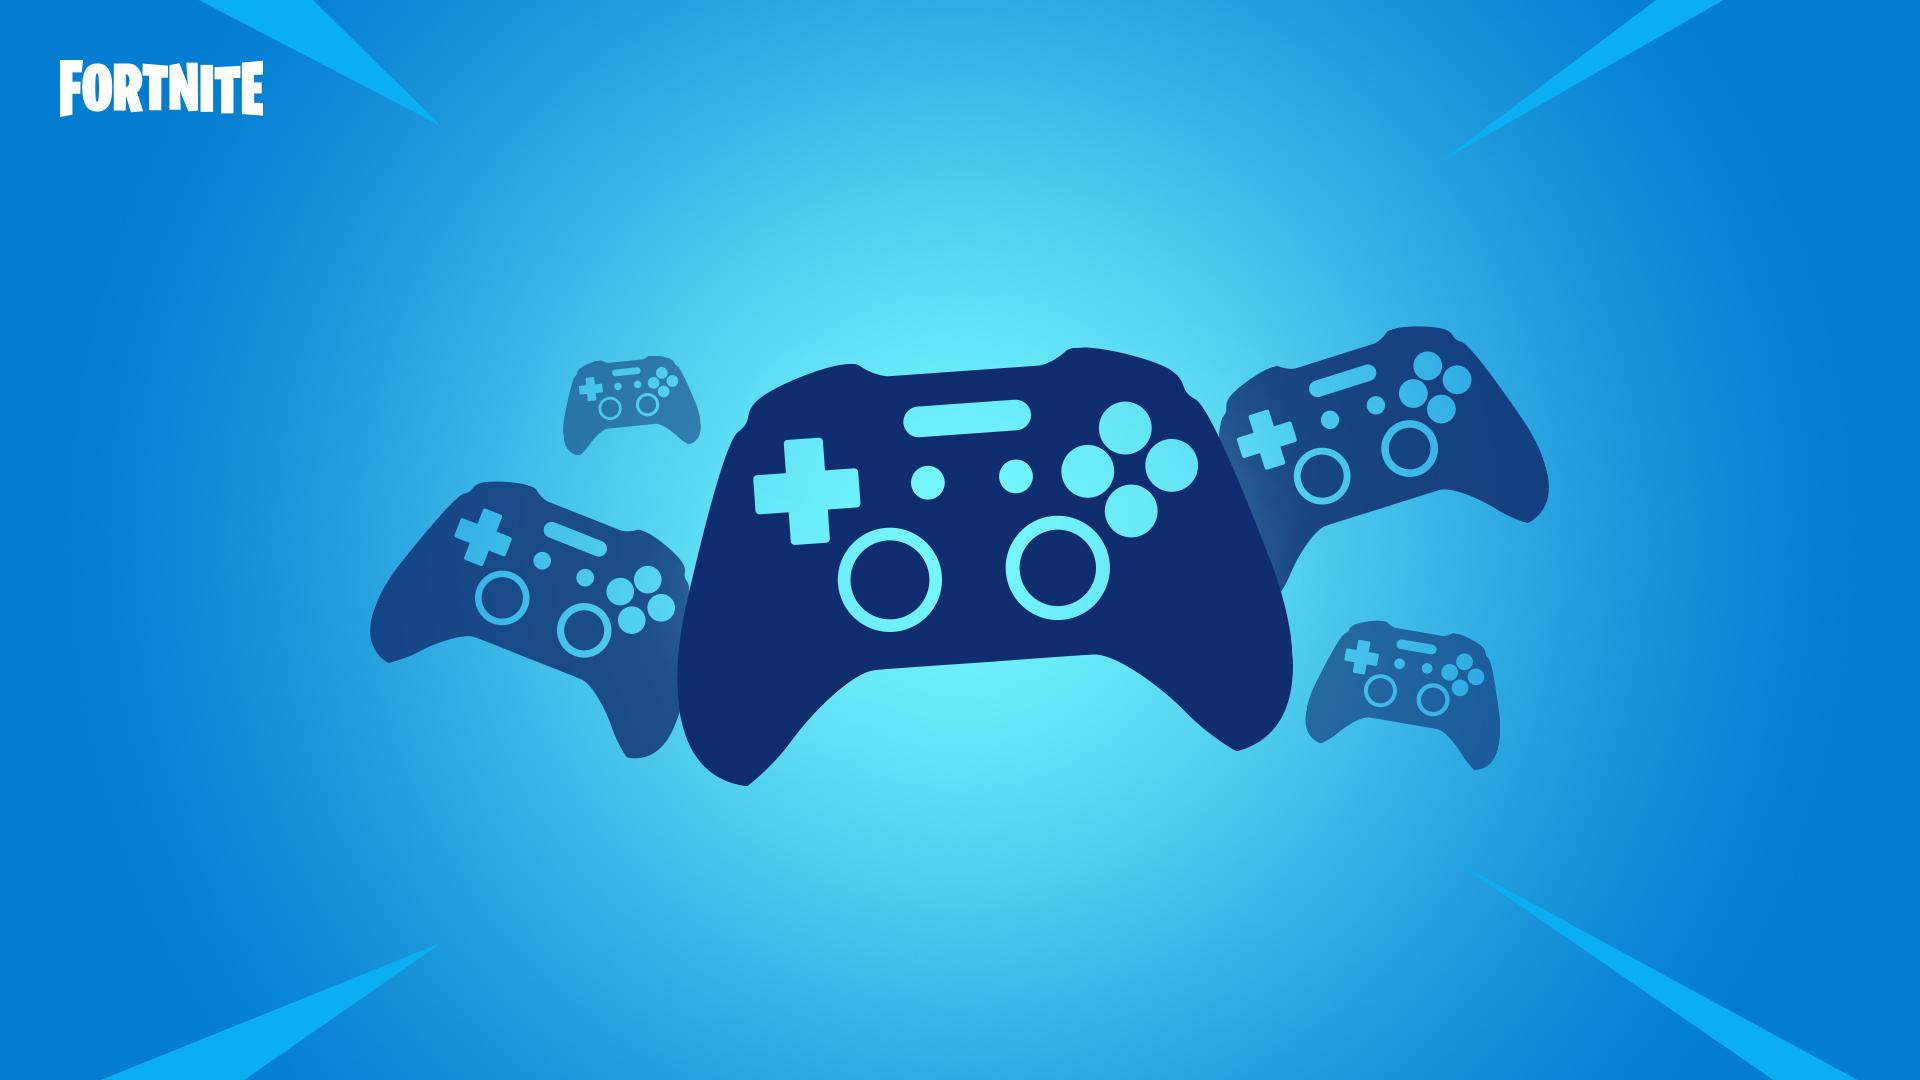 Artwork featuring game controllers.